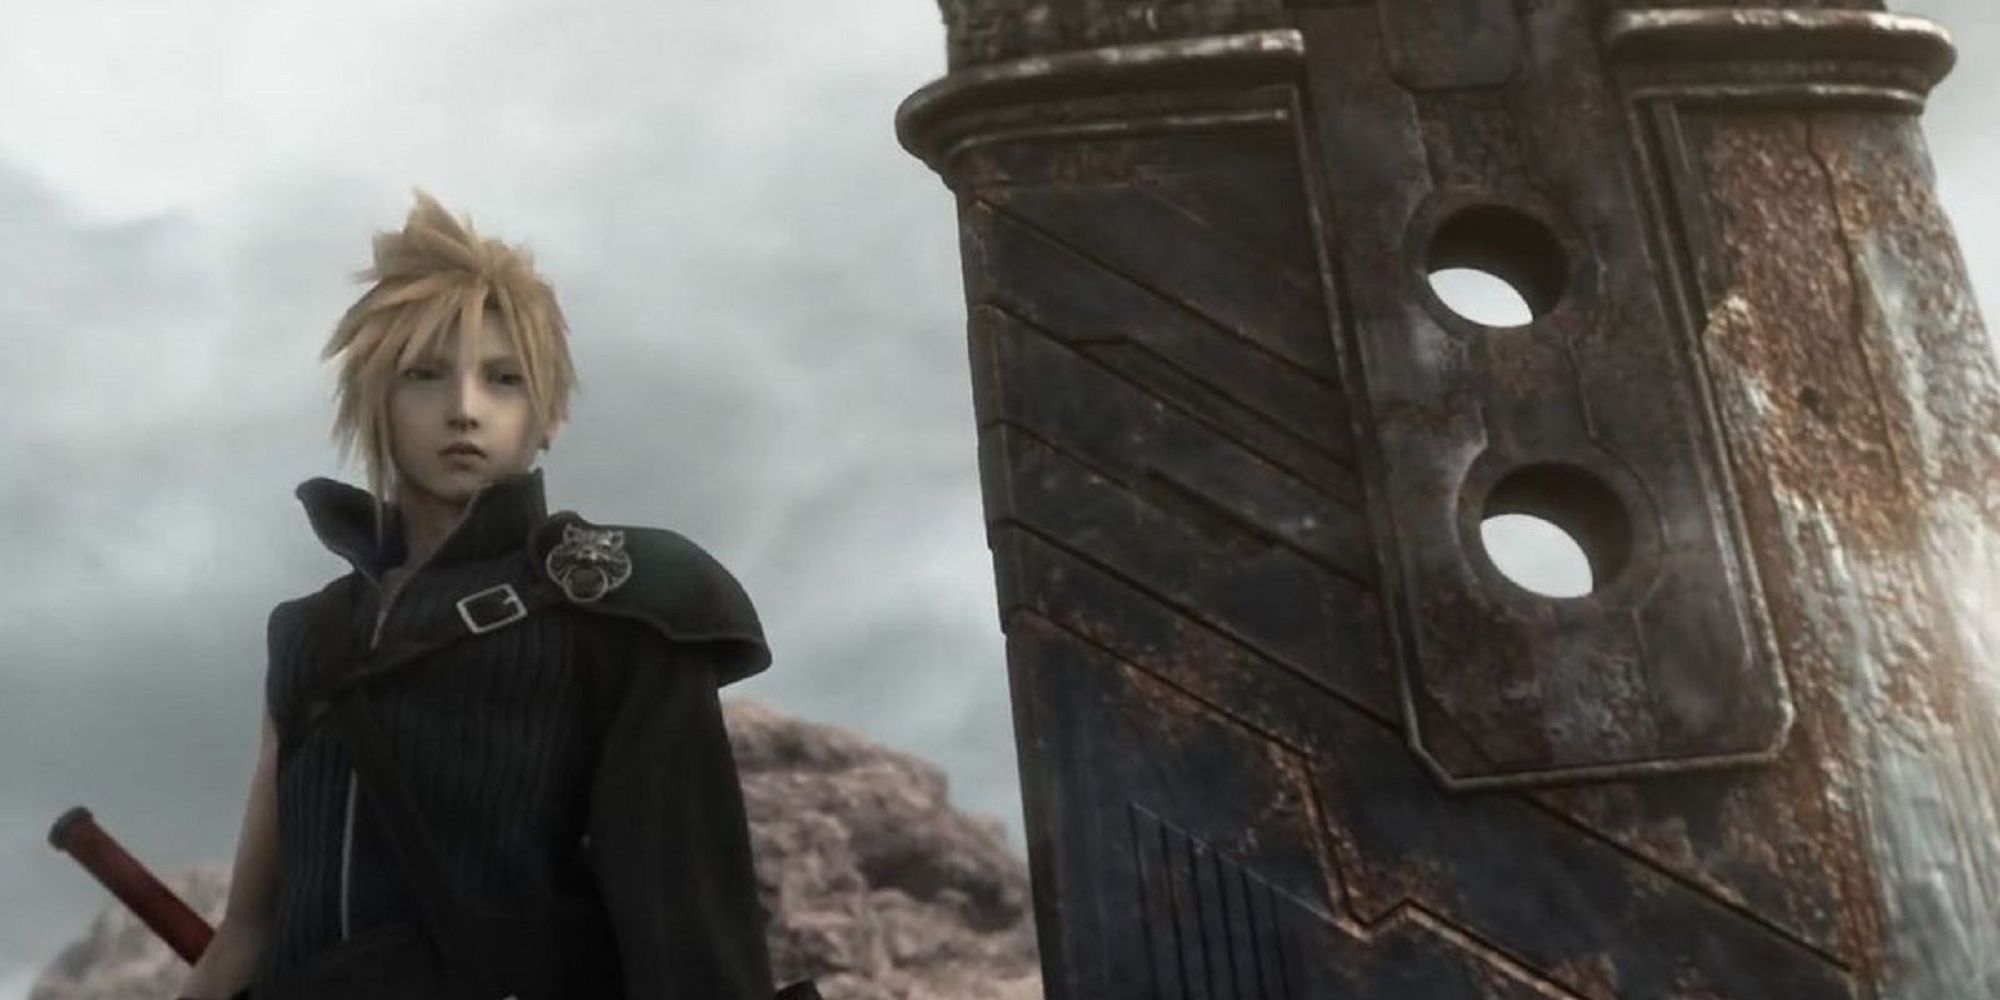 Cloud Strife stares at the Buster Sword in Advent Children.